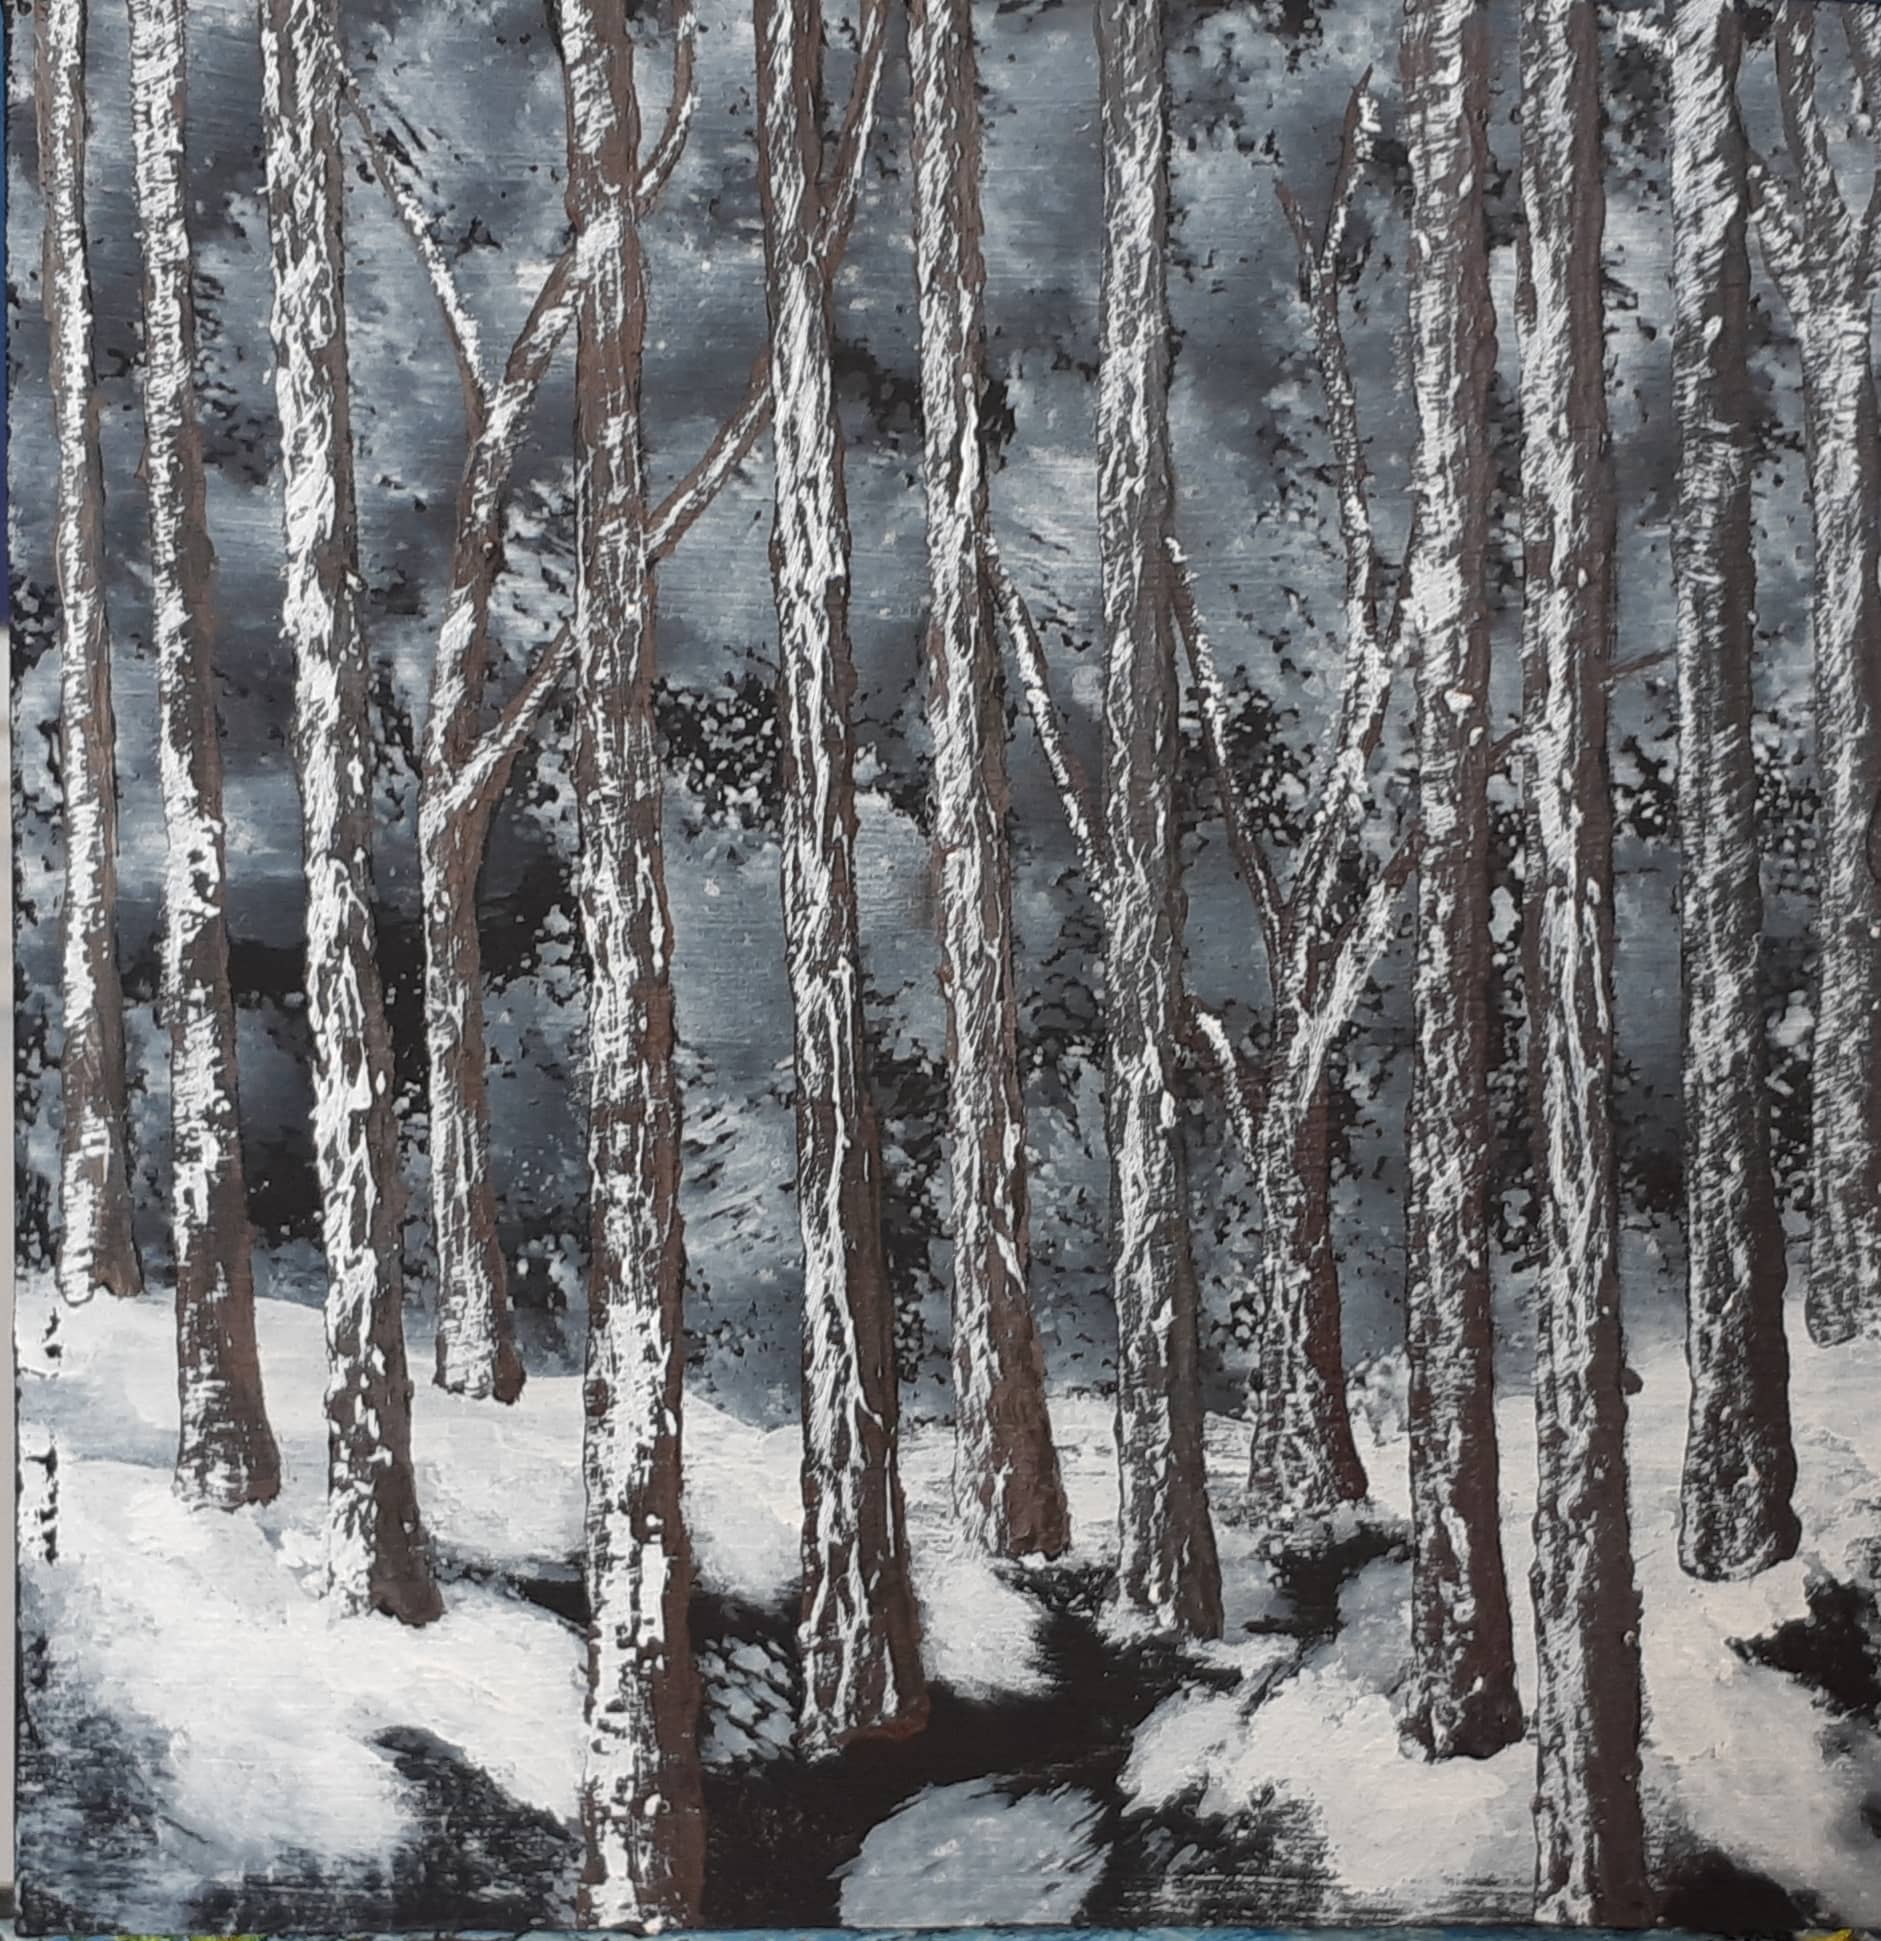 Majestic 5 Acrylic on Board 8 in. x 8 in. Moody yet calming a walk in this winter forest will inspire peace of mind. Monochrome (black and white) the background is subdued white on black gesso with the middle and foreground populated with tree trunks in their natural palette. The ground is snow covered and highlighting the unevenness of the terrain.